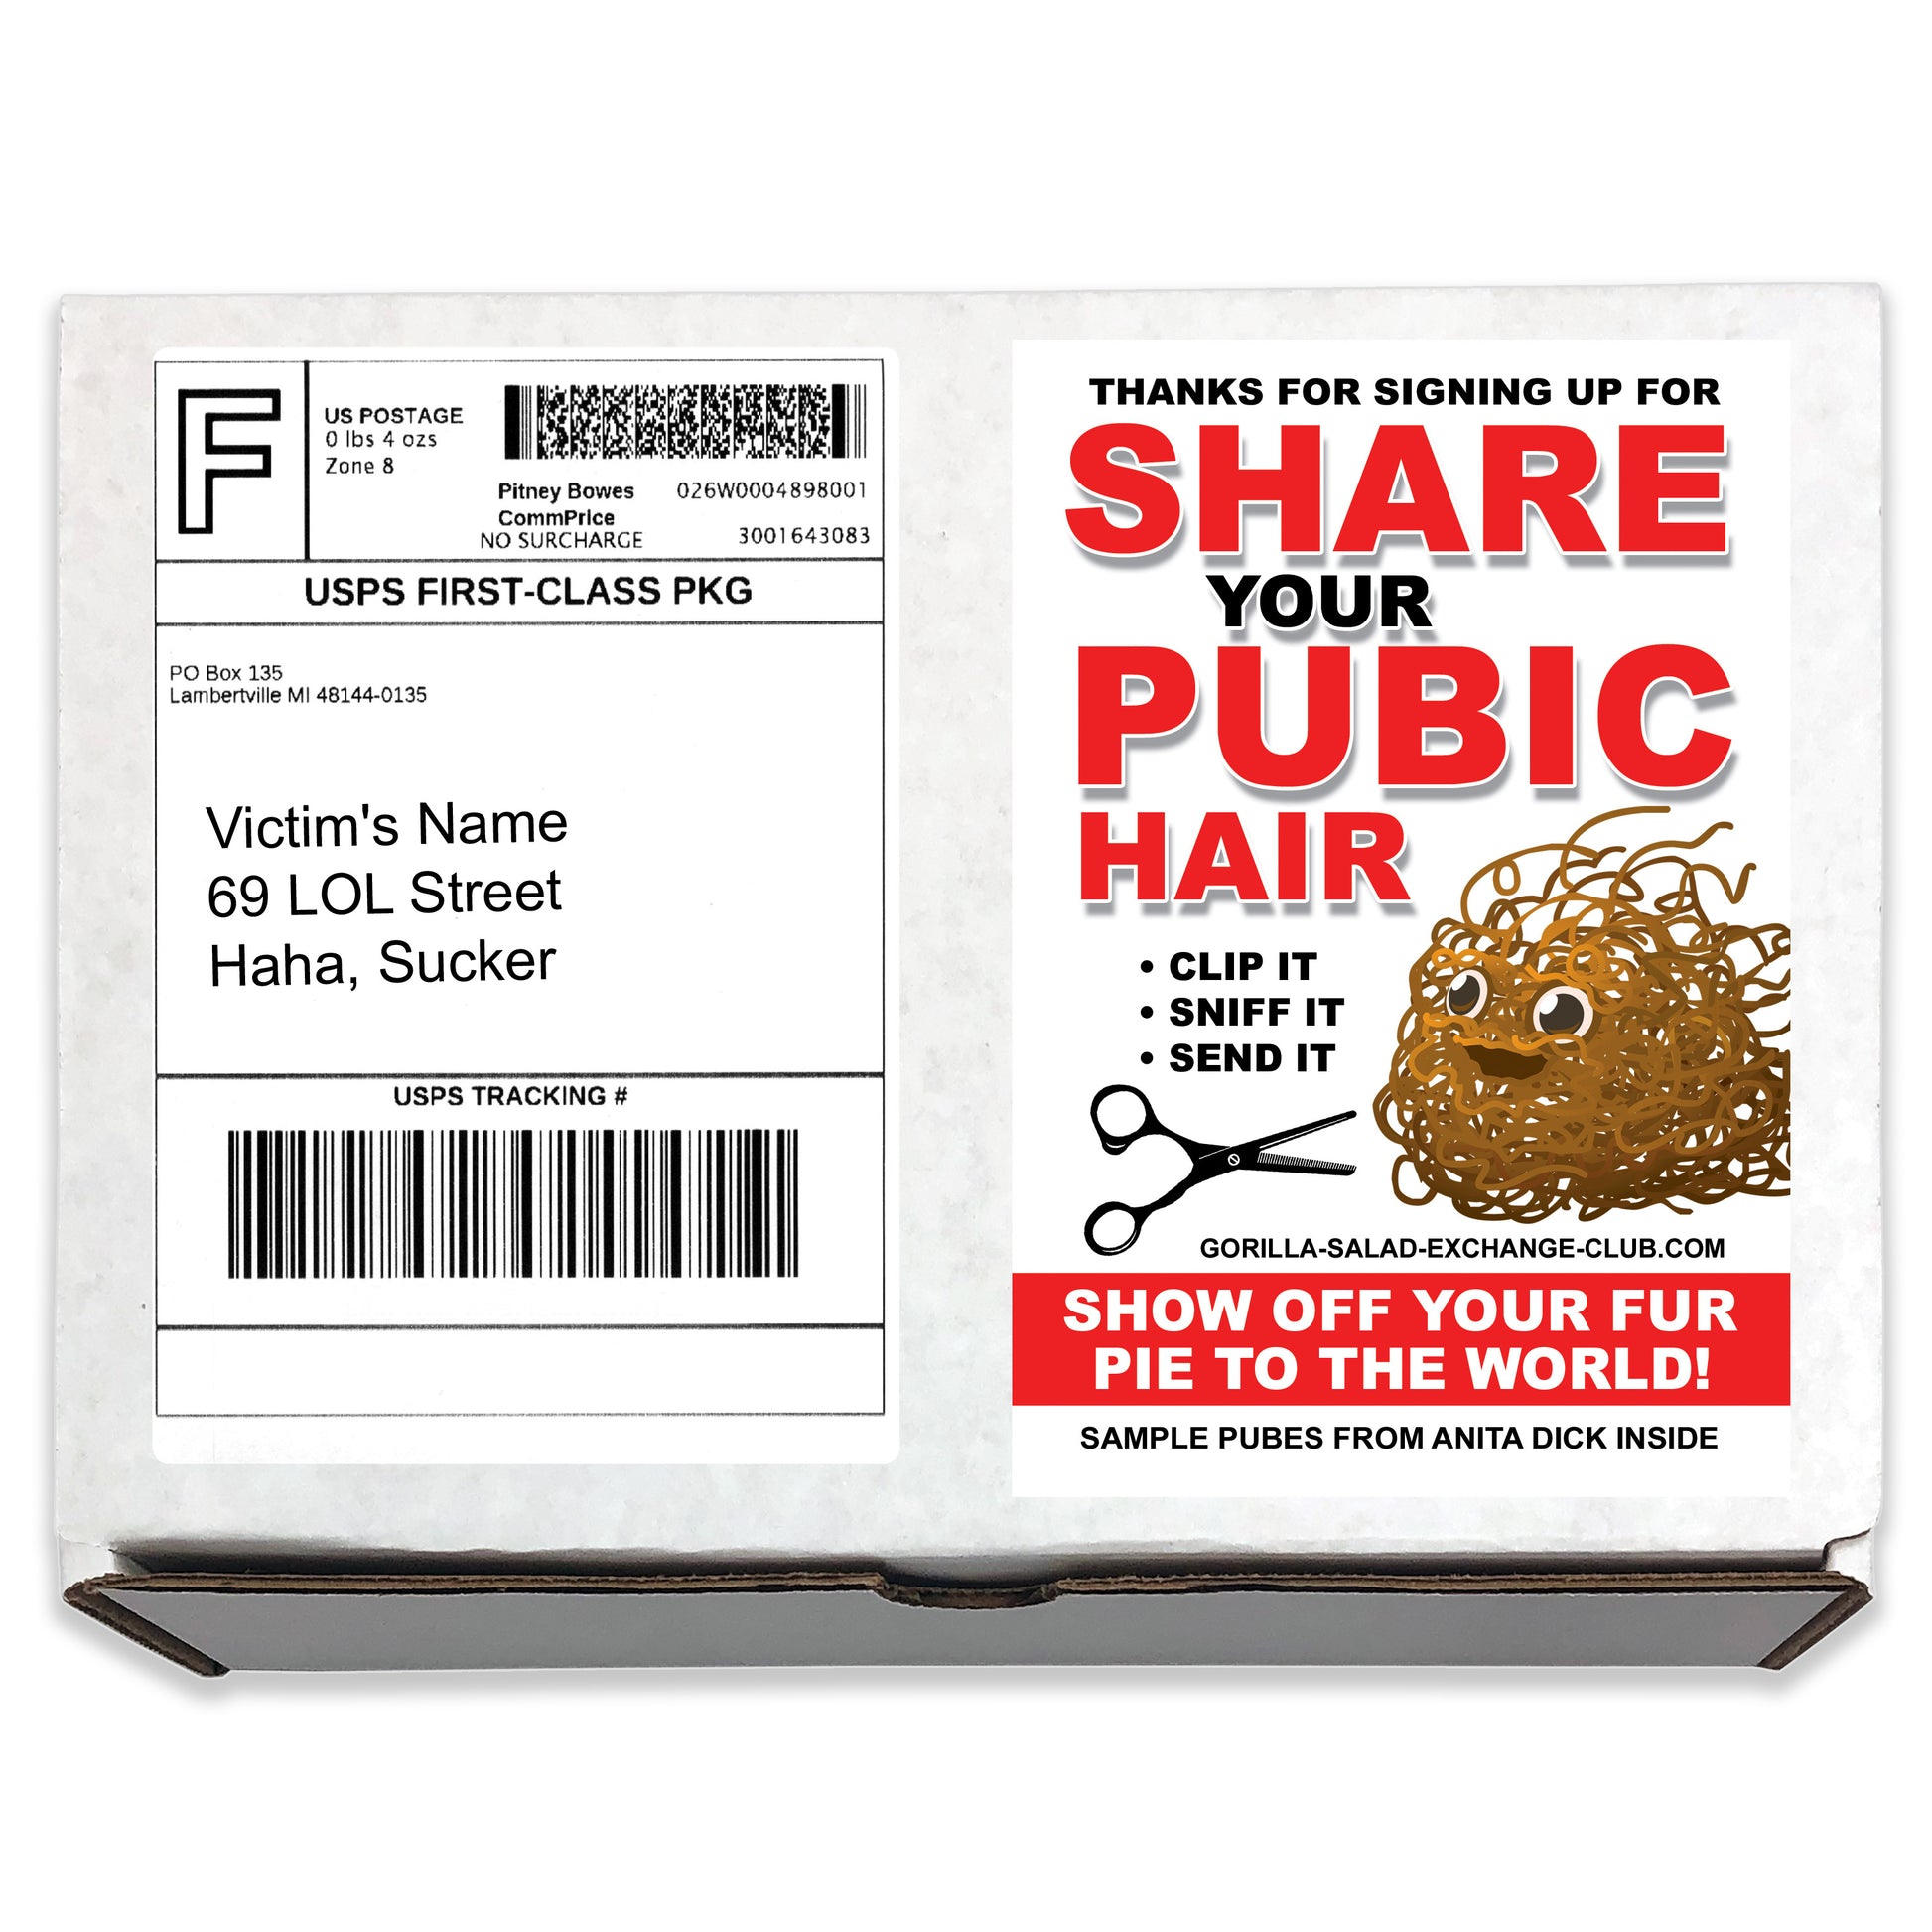 Share Your Pubic Hair embarrassing prank box